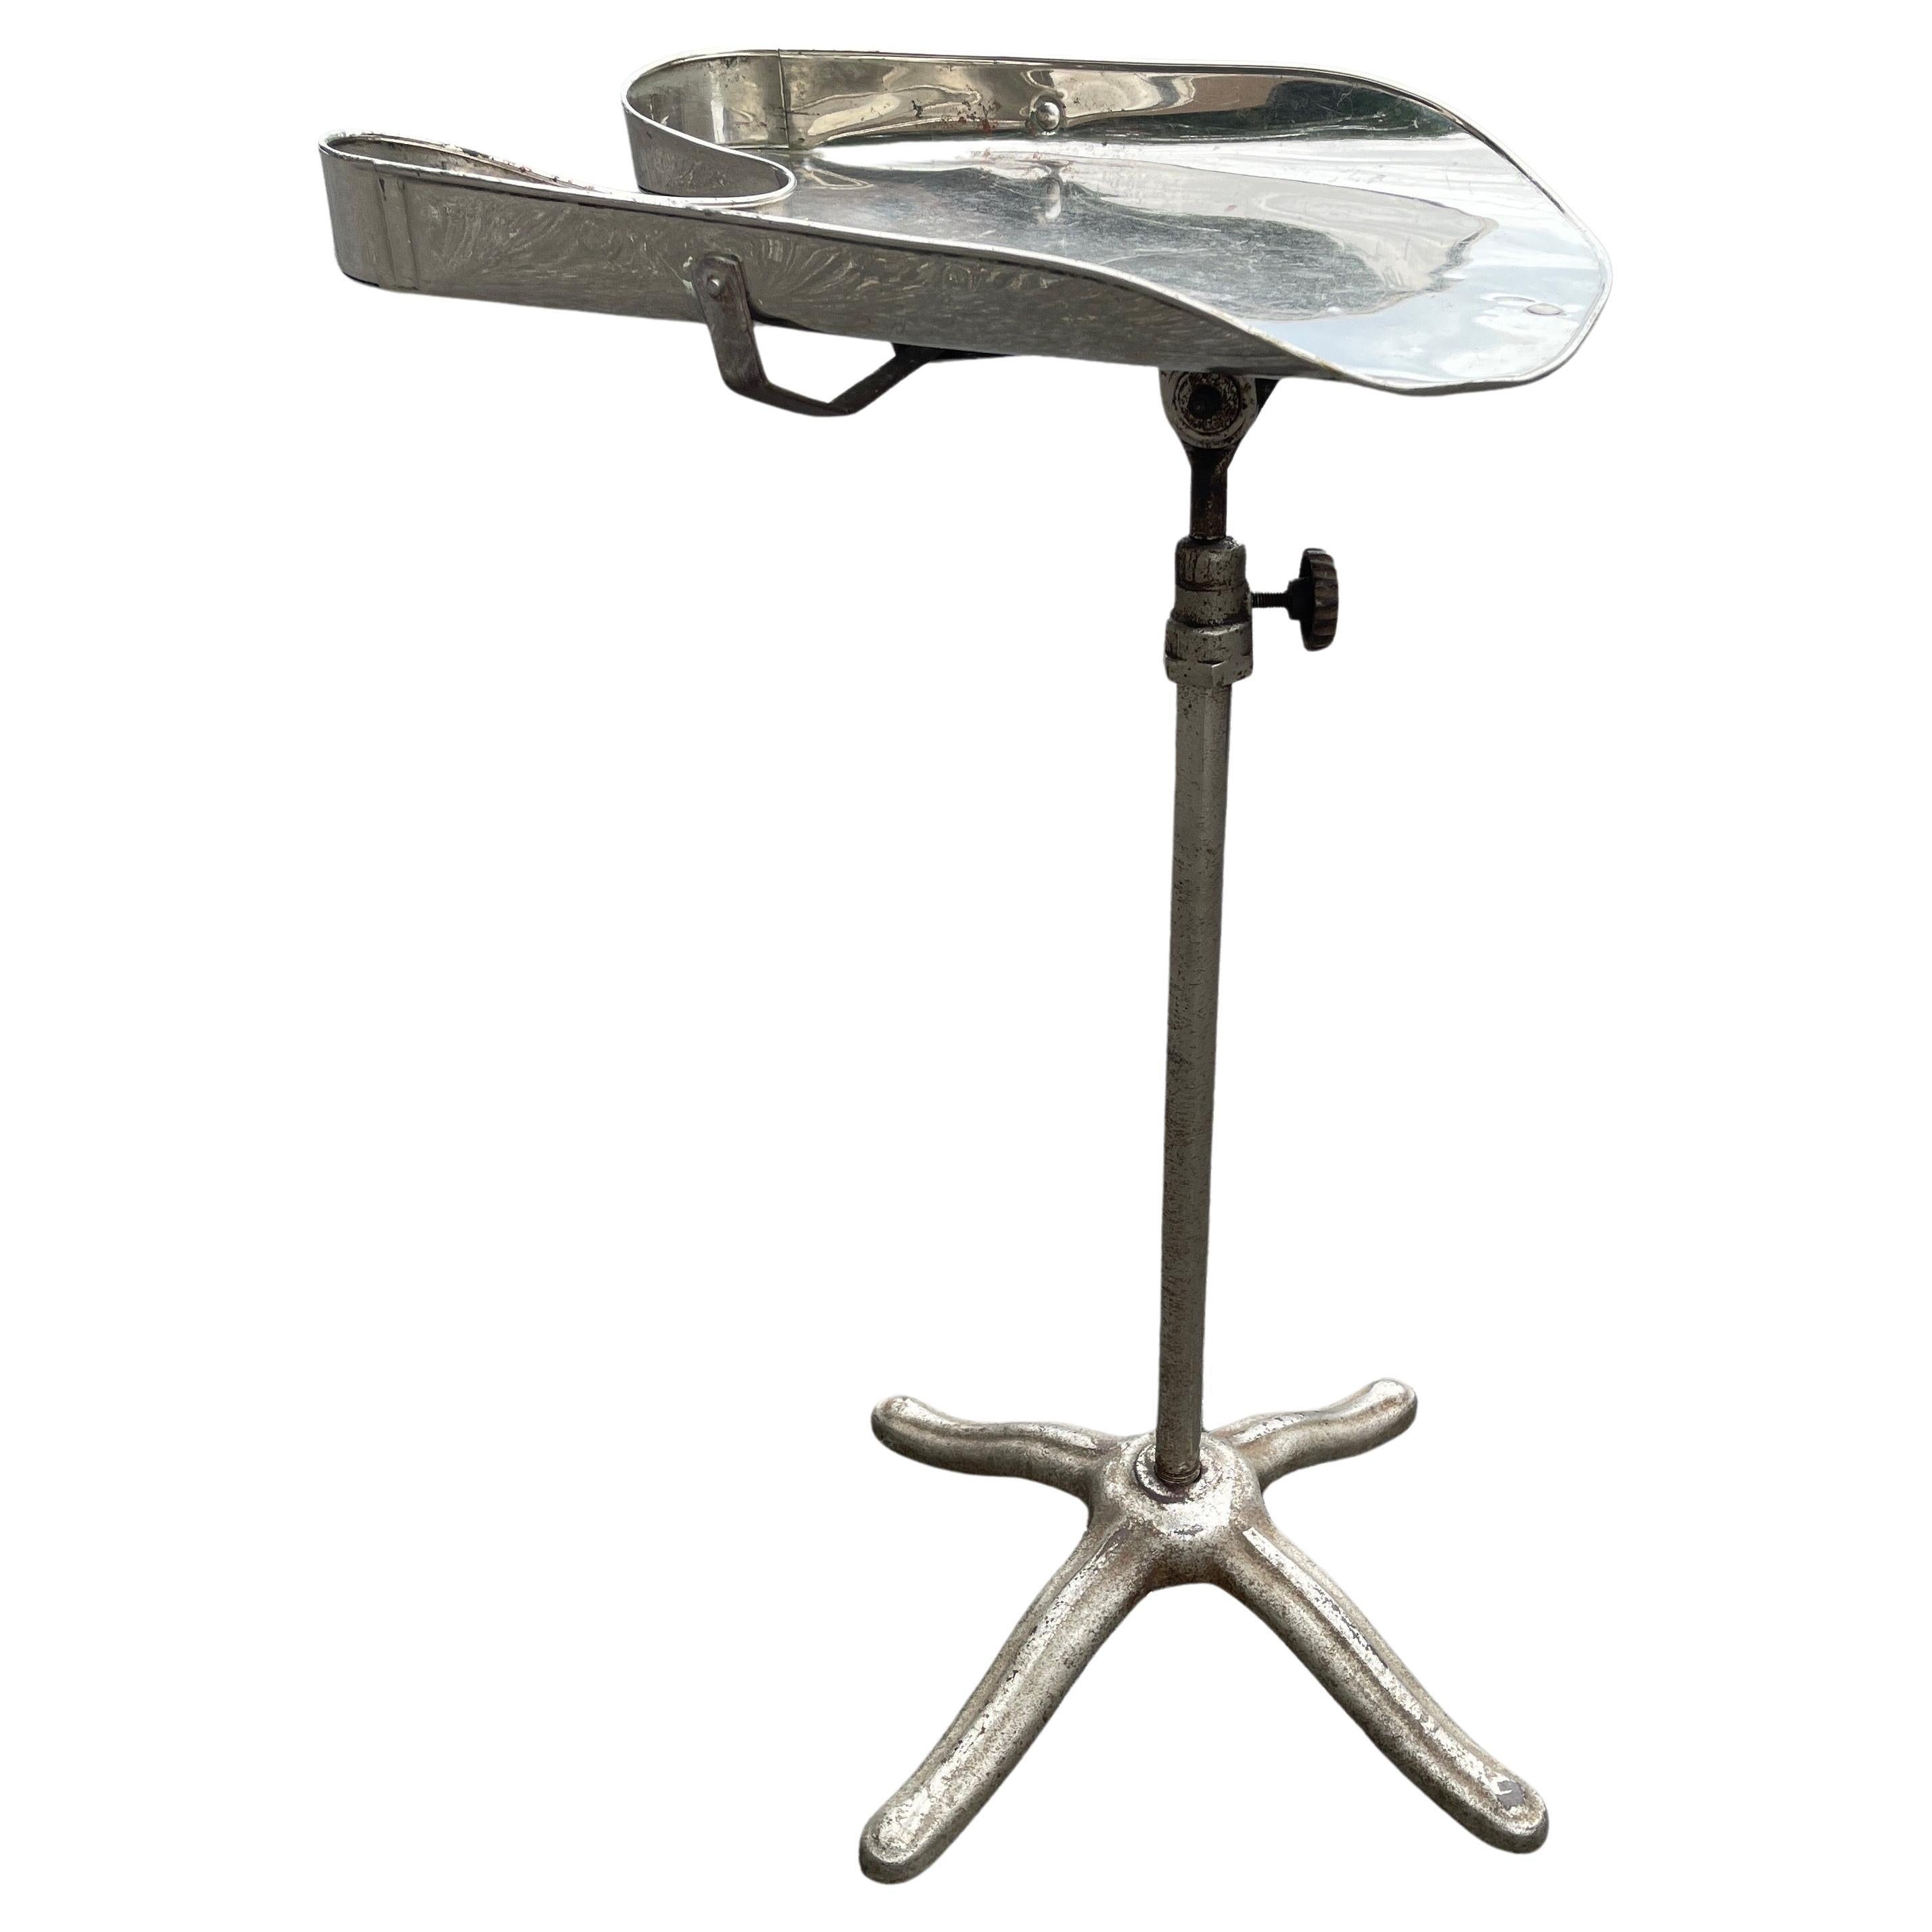 Vintage industrial chrome hair salon stand side table. 
The table has a tilt top functionality, please see detailed listed.